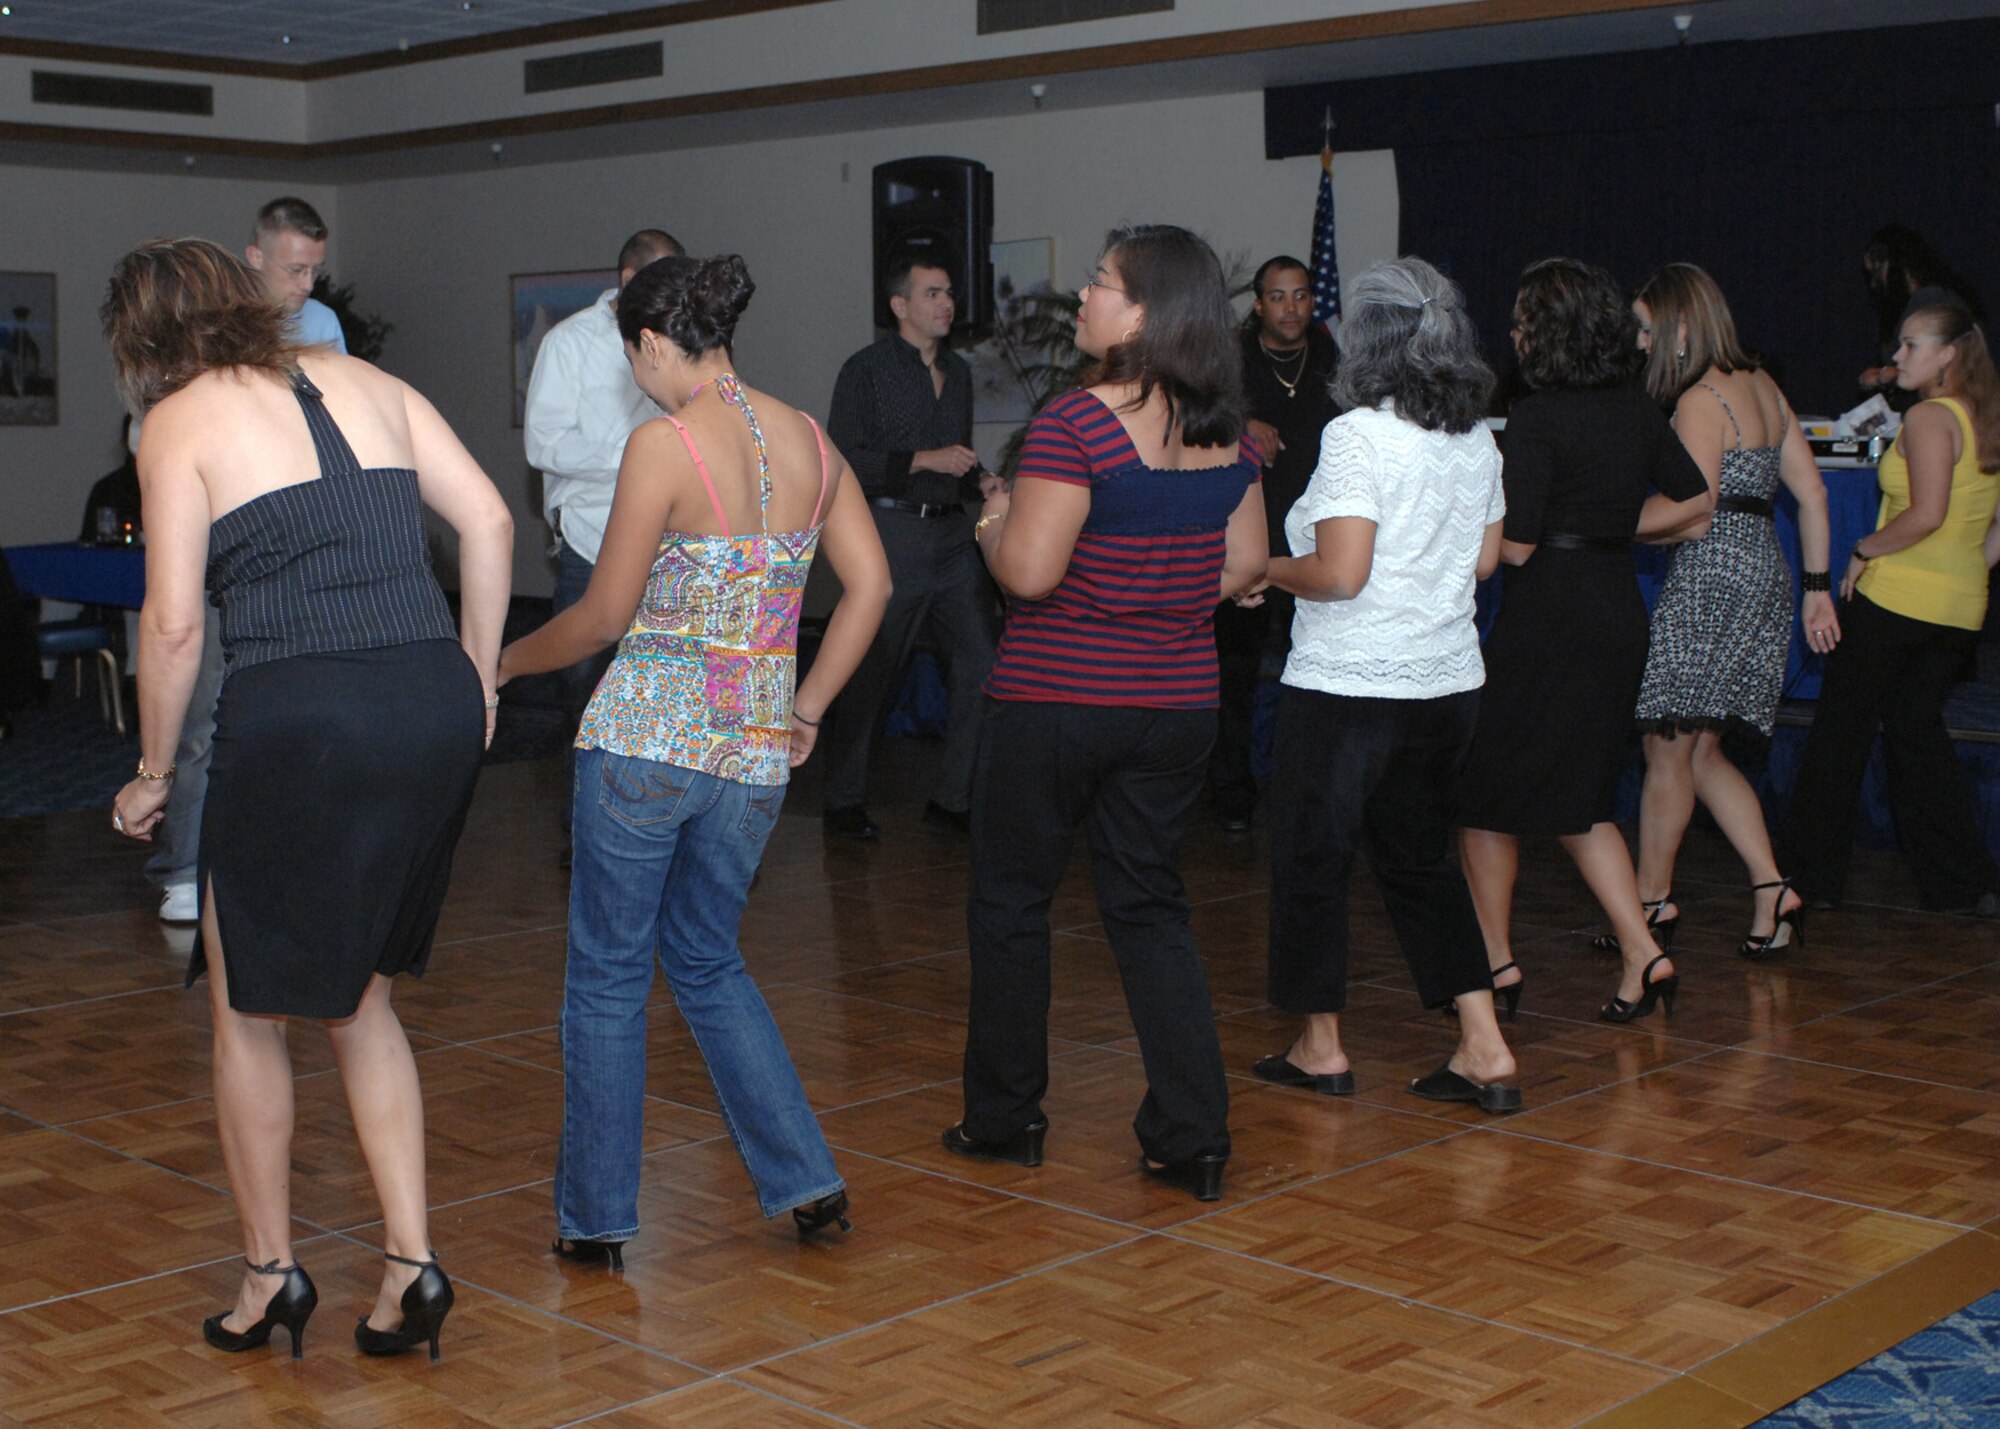 Guests that attended Latin Night, gathered together on the dancefloor to practice the basic movements of salsa and mambo, at Holloman Air Force Base, N.M., October 3. Latin Night was held at the Desert Sands Enlisted Club to celebrate Hispanic Heritage month. (U.S. Air Force photo/Airman 1st Class Veronica Salgado)         